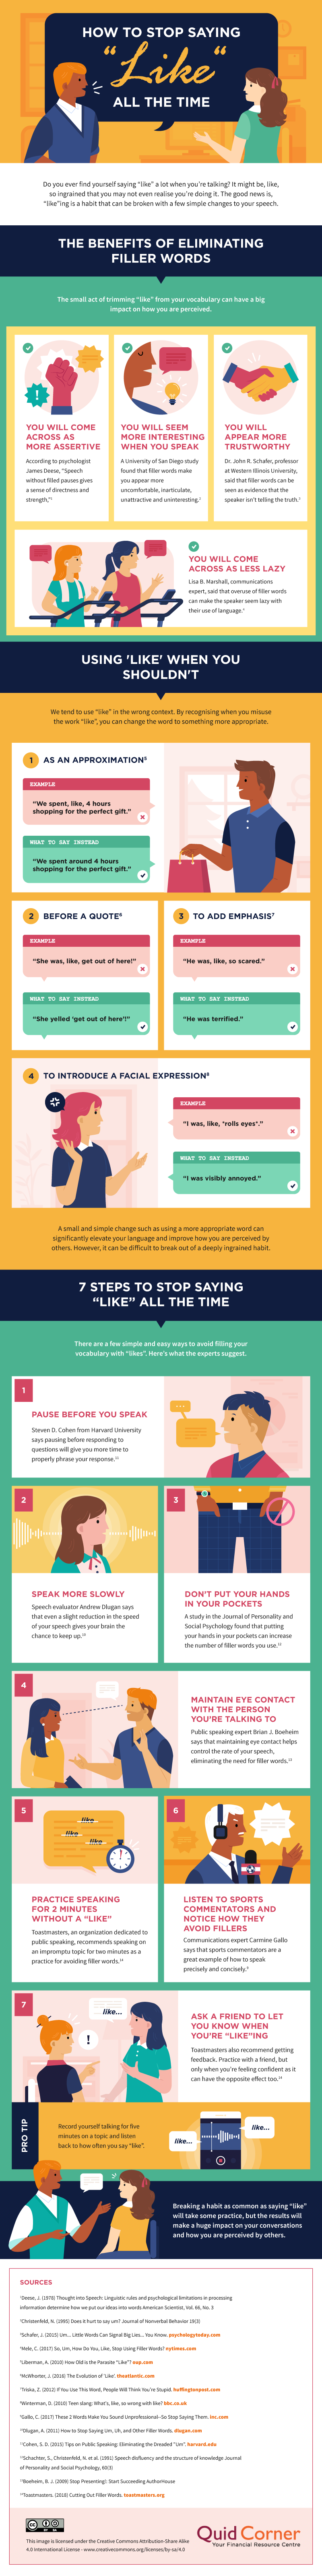 7 Ways to Erase “Like” From Your Work Vocabulary, This infographic will help you learn what words you can use instead of like